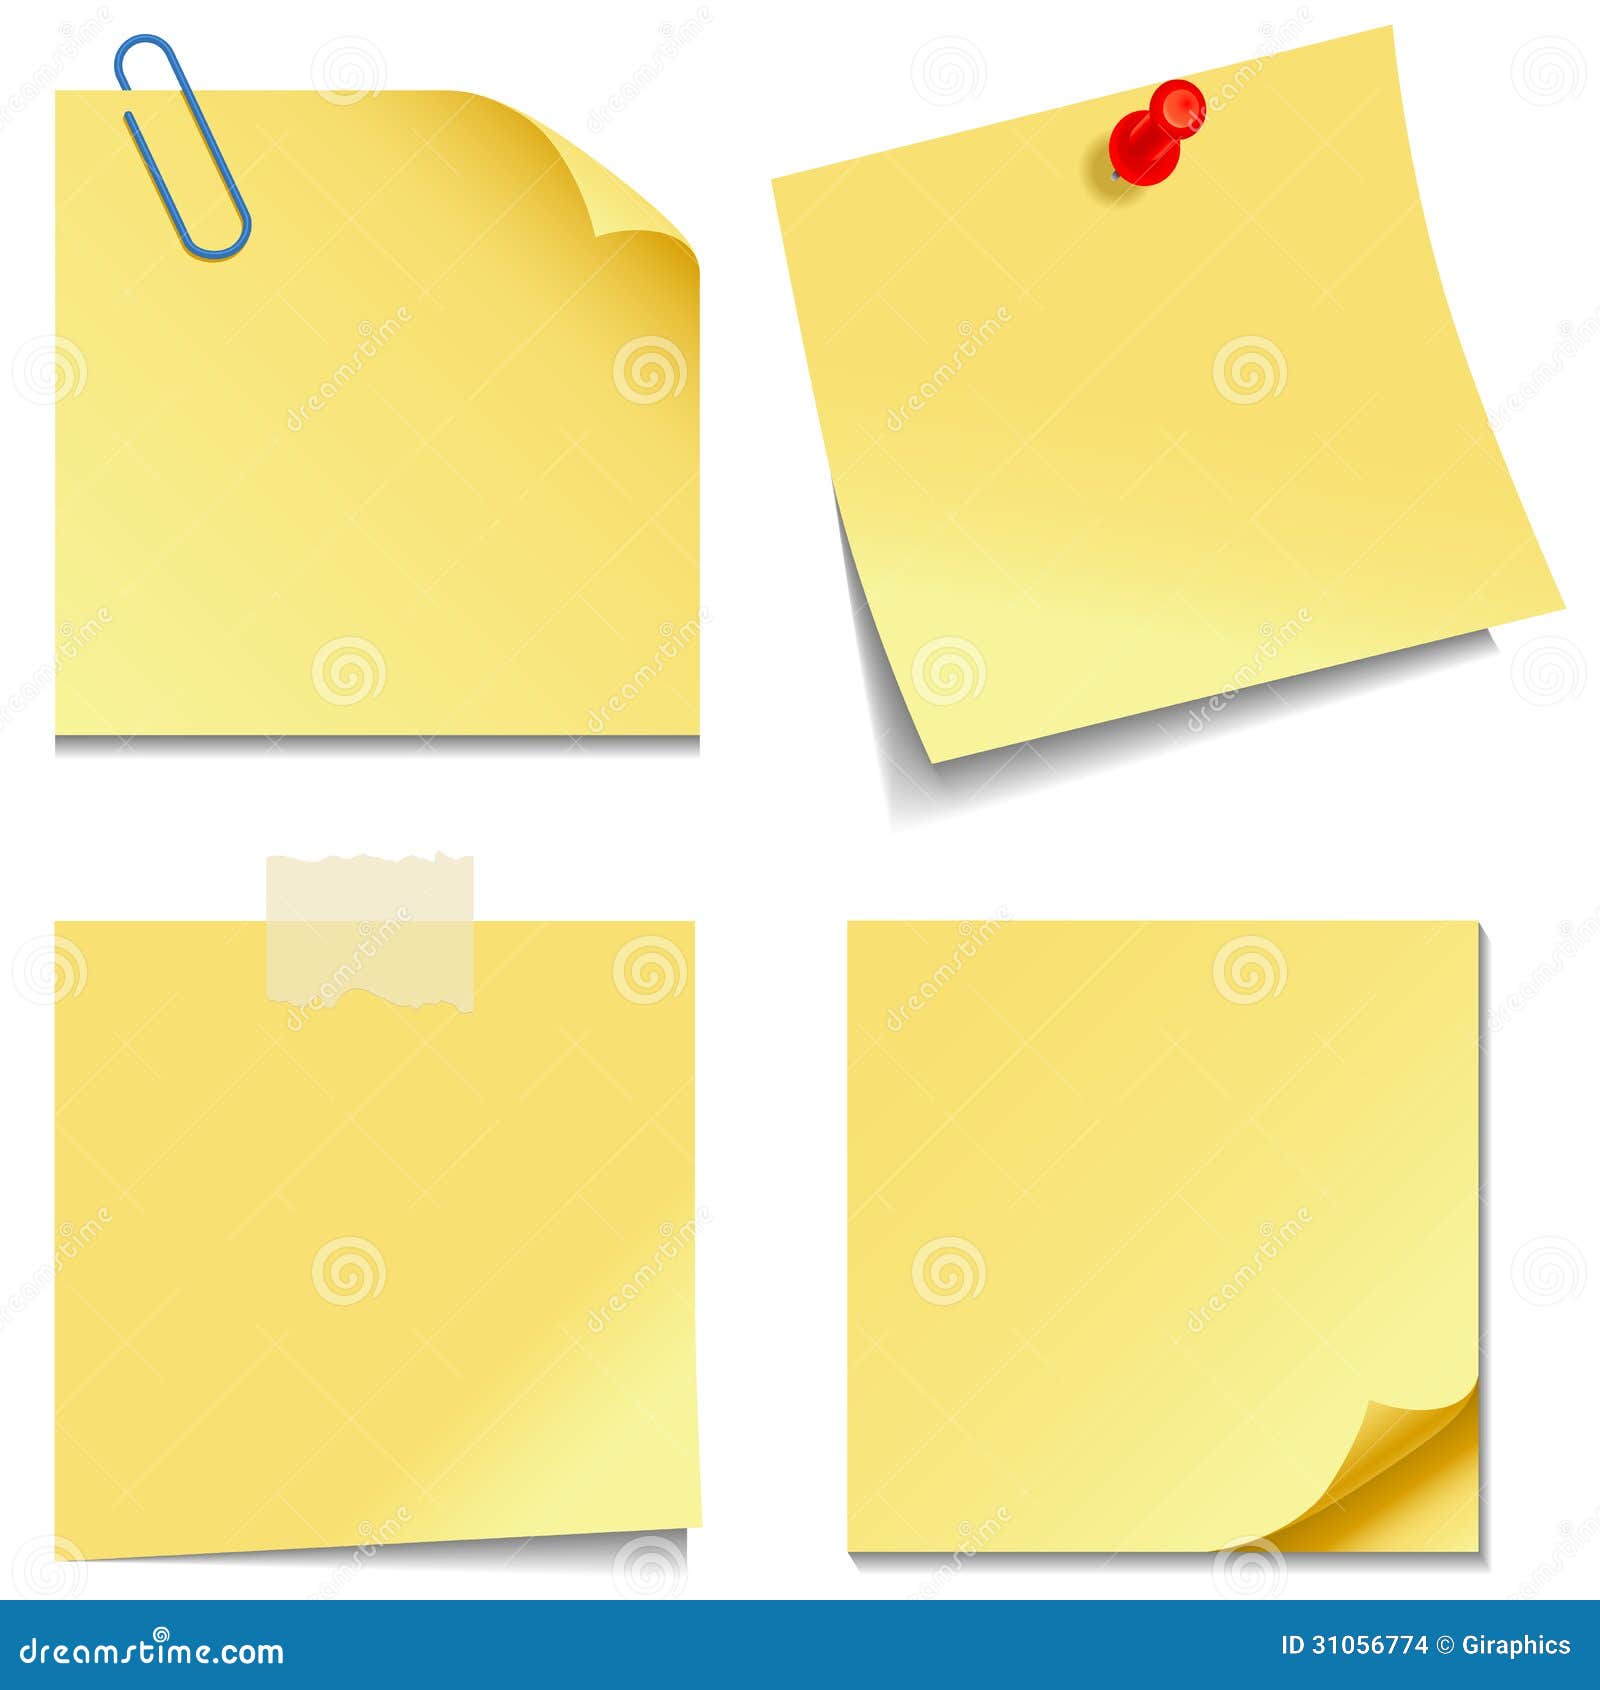 Sticky notes big set collection. Realistic yellow post it notes isolated in  white background. Stock Vector